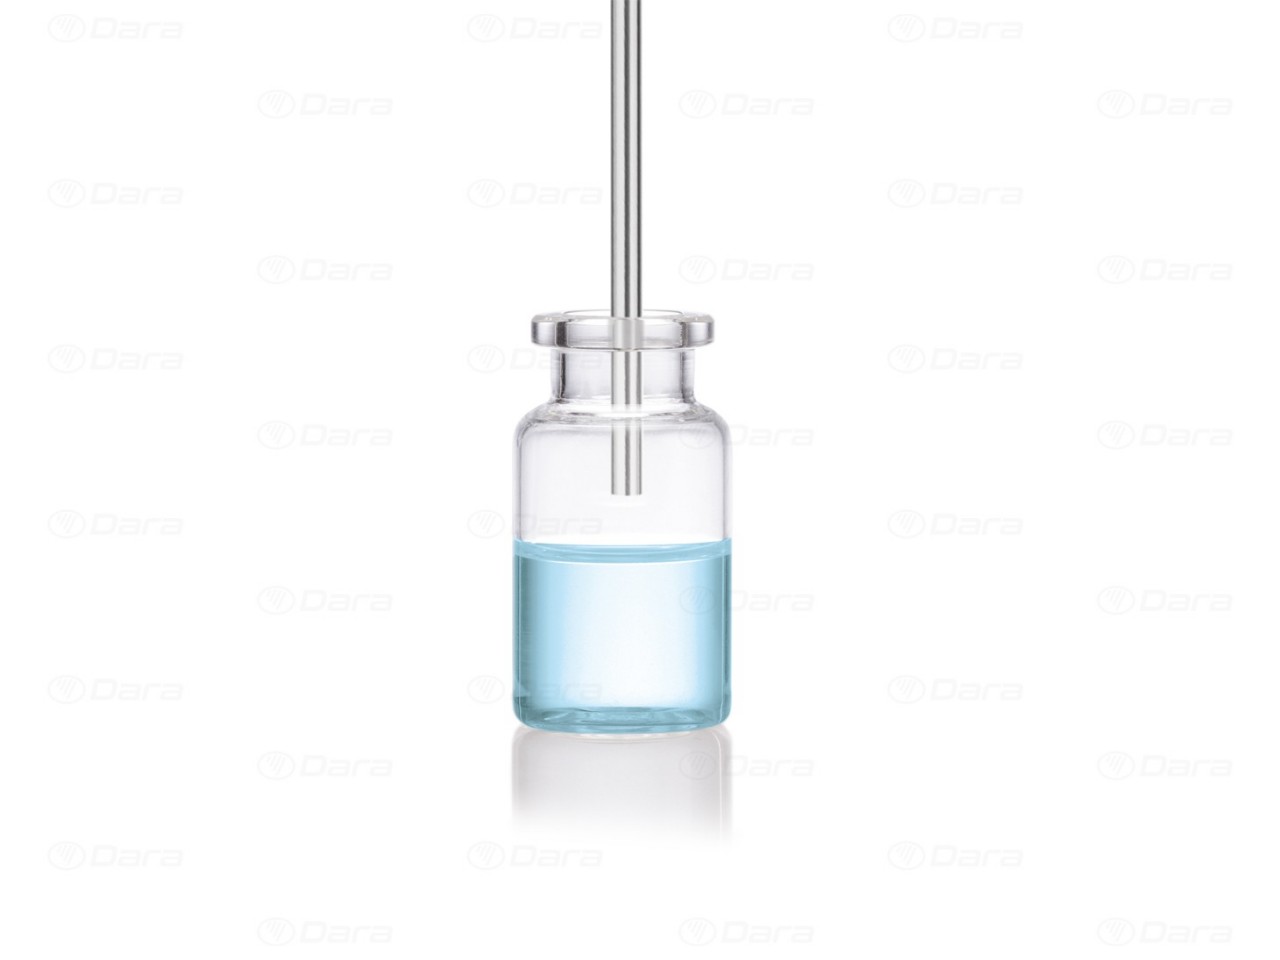 Fillers for vials and jars